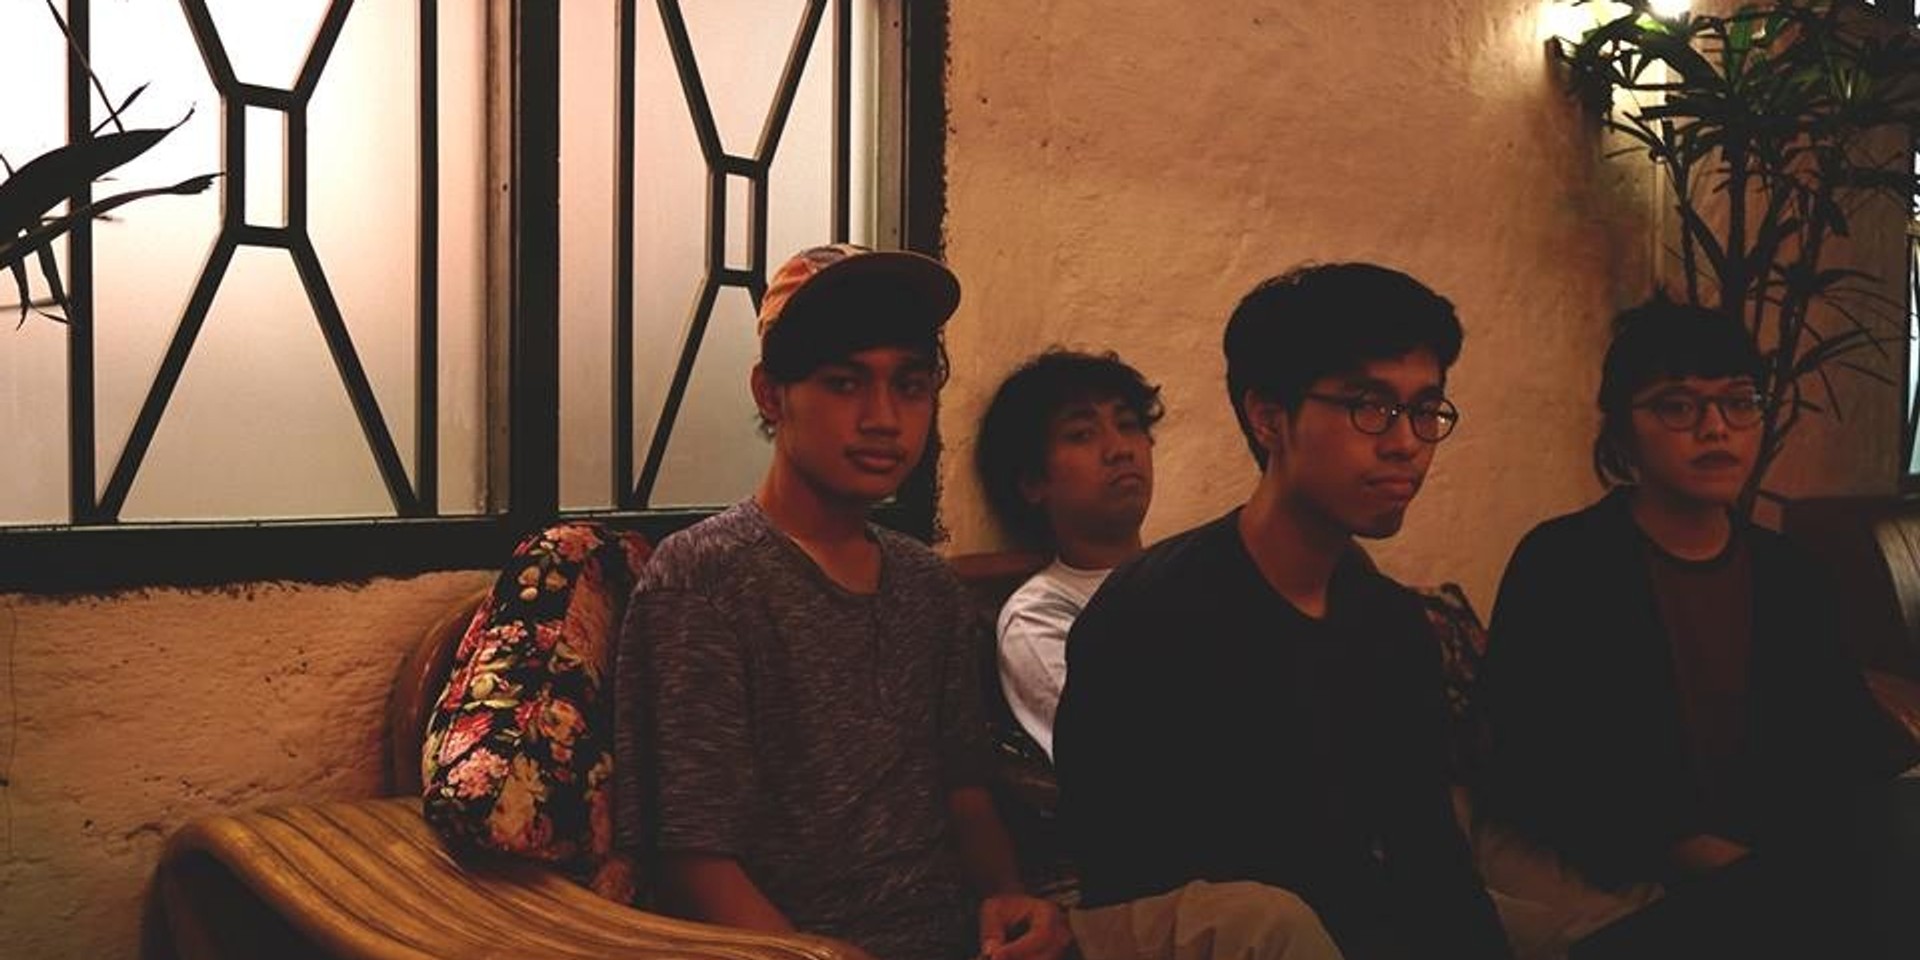 Indonesian indie-pop group Bedchamber to tour Southeast Asia